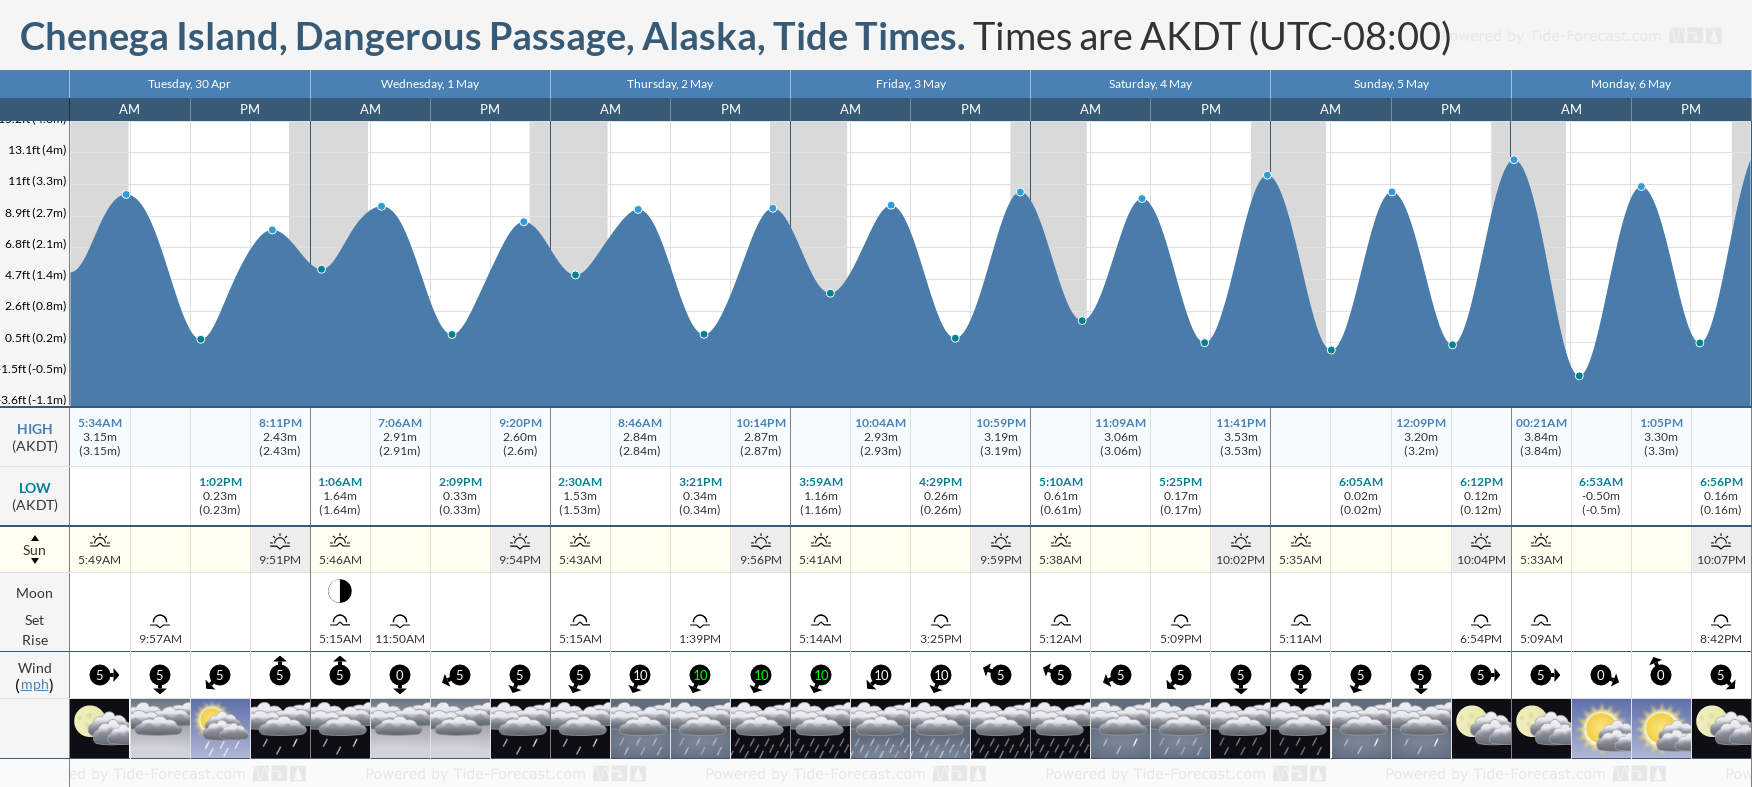 Chenega Island, Dangerous Passage, Alaska Tide Chart including high and low tide tide times for the next 7 days